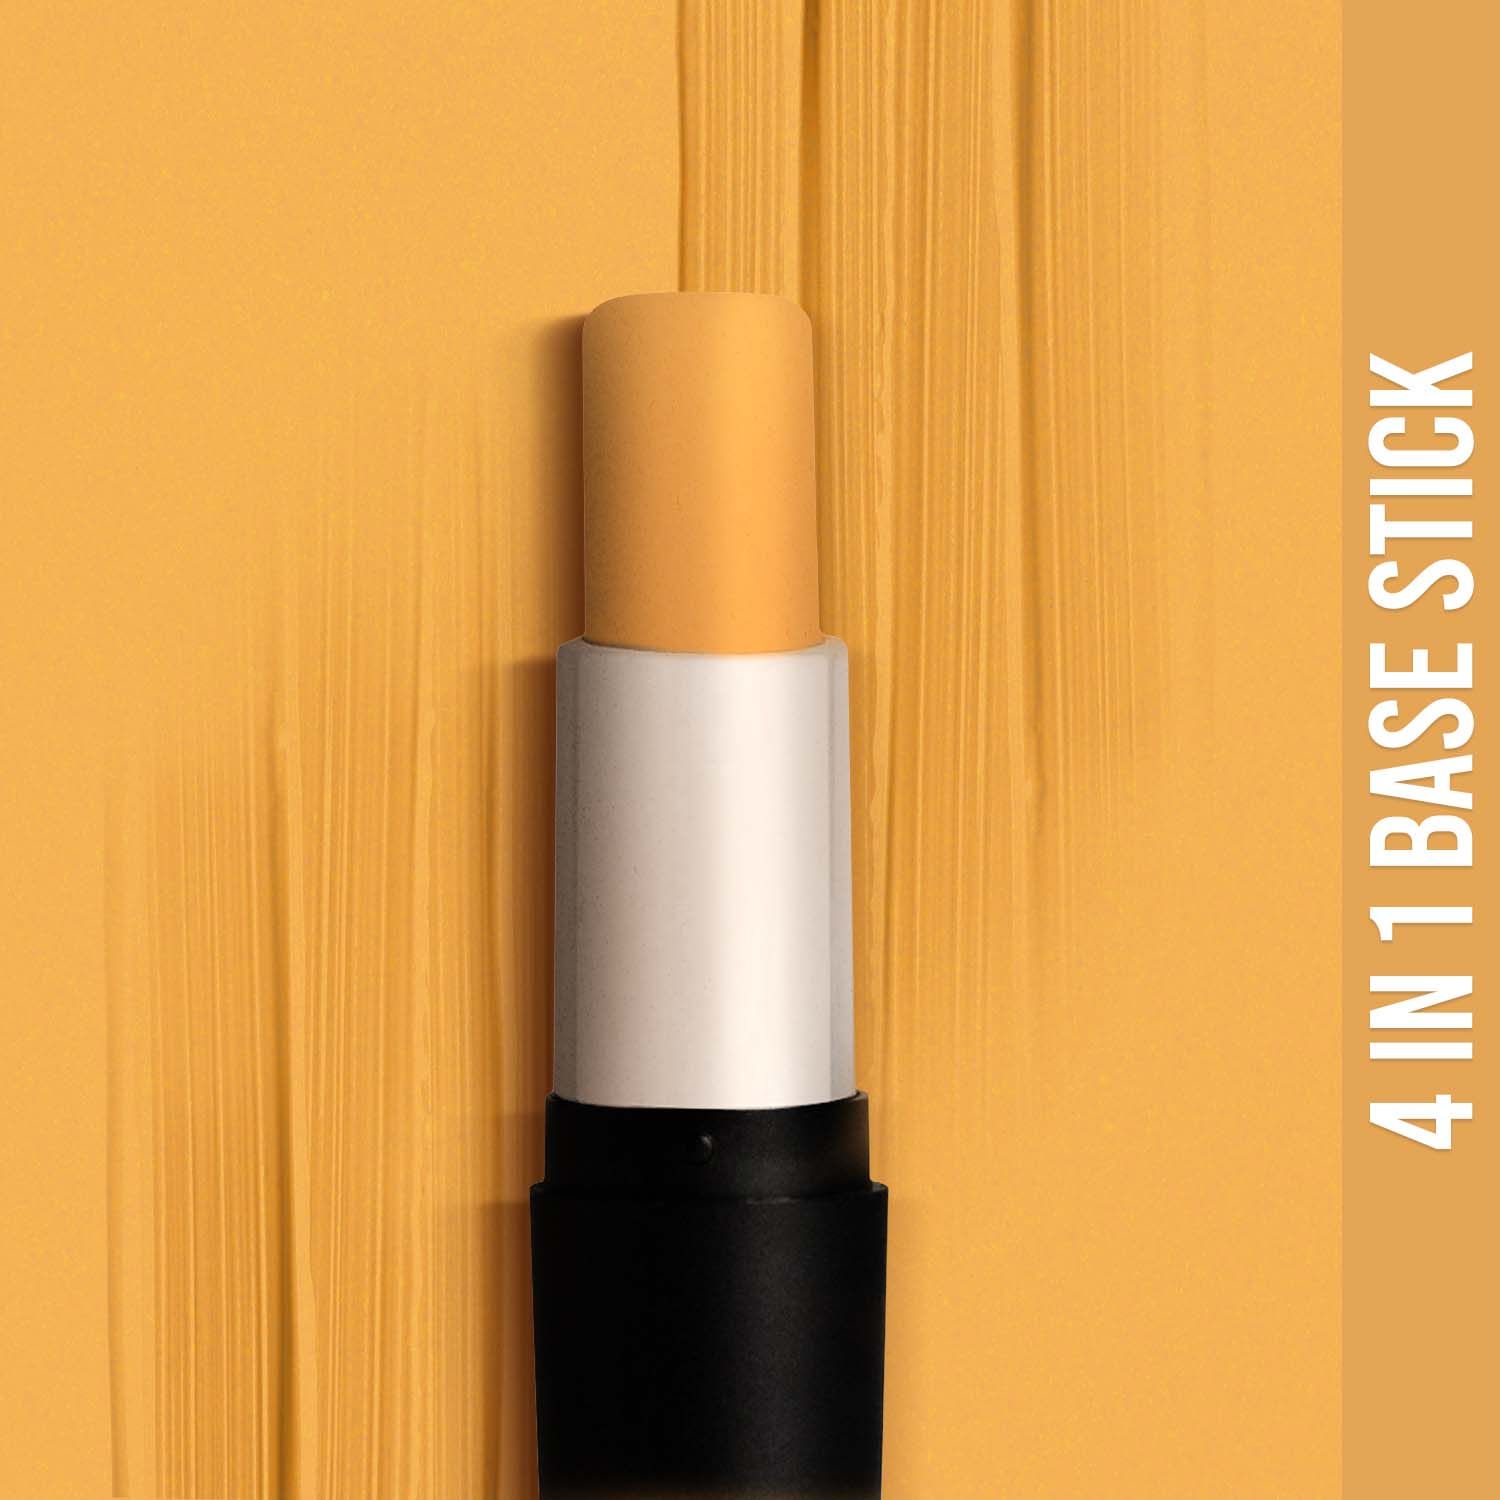 Buy NY Bae All In One Stick - Honey, I'm Going To Soho 16 | Foundation Concealer Contour Colour Corrector Stick | Fair Skin | Creamy Matte Finish | Enriched With Vitamin E | Covers Blemishes & Dark Circles | Medium Coverage | Cruelty Free - Purplle